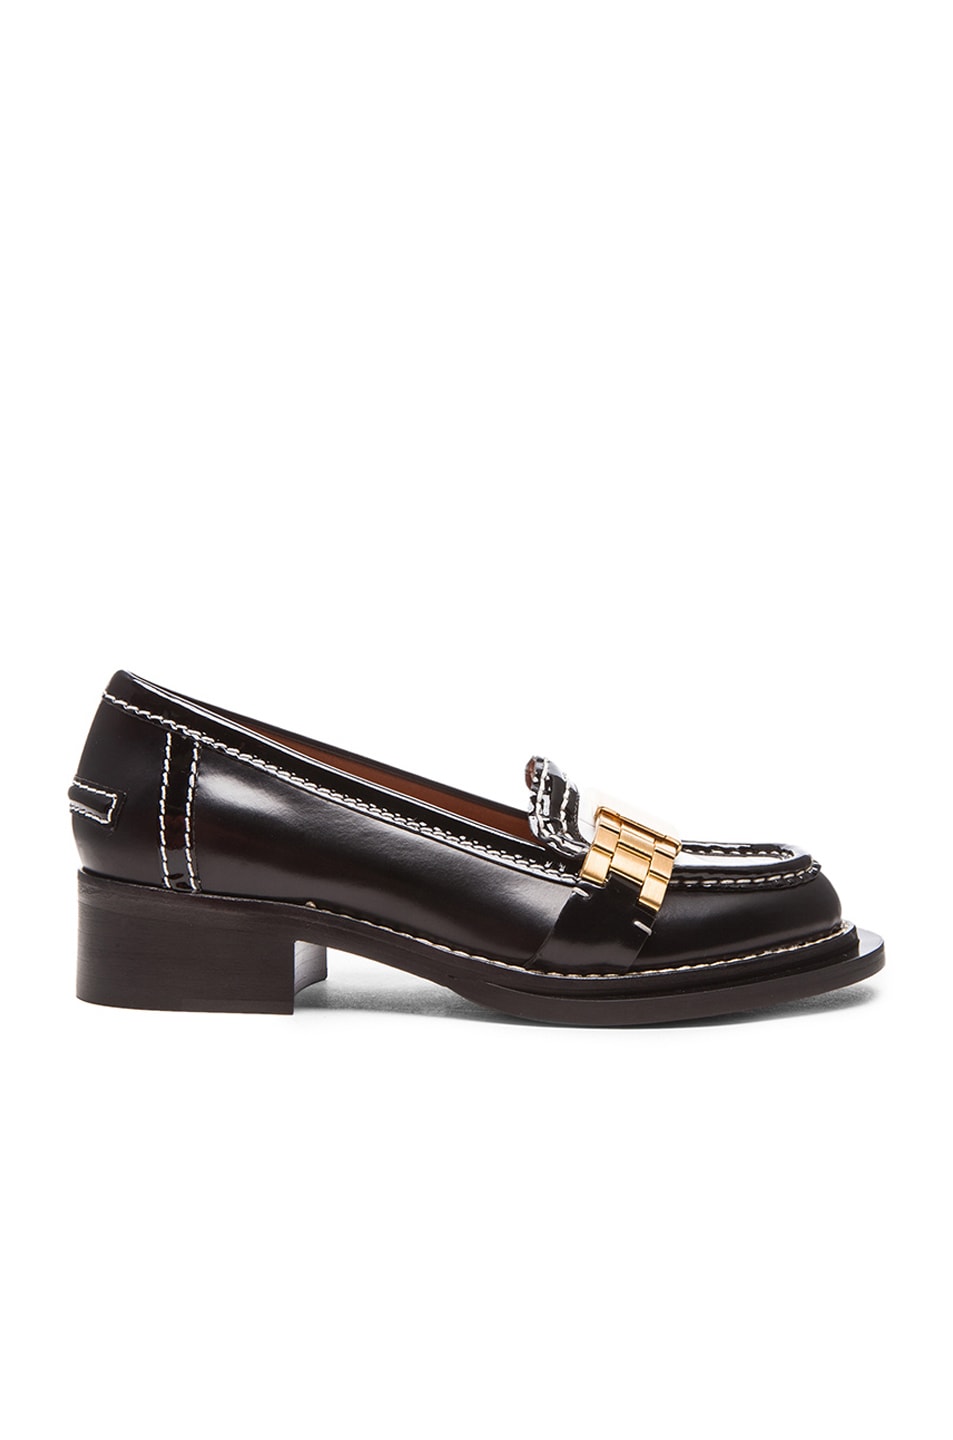 Image 1 of Acne Studios Penny Watch Strap Leather Loafers in Black & White